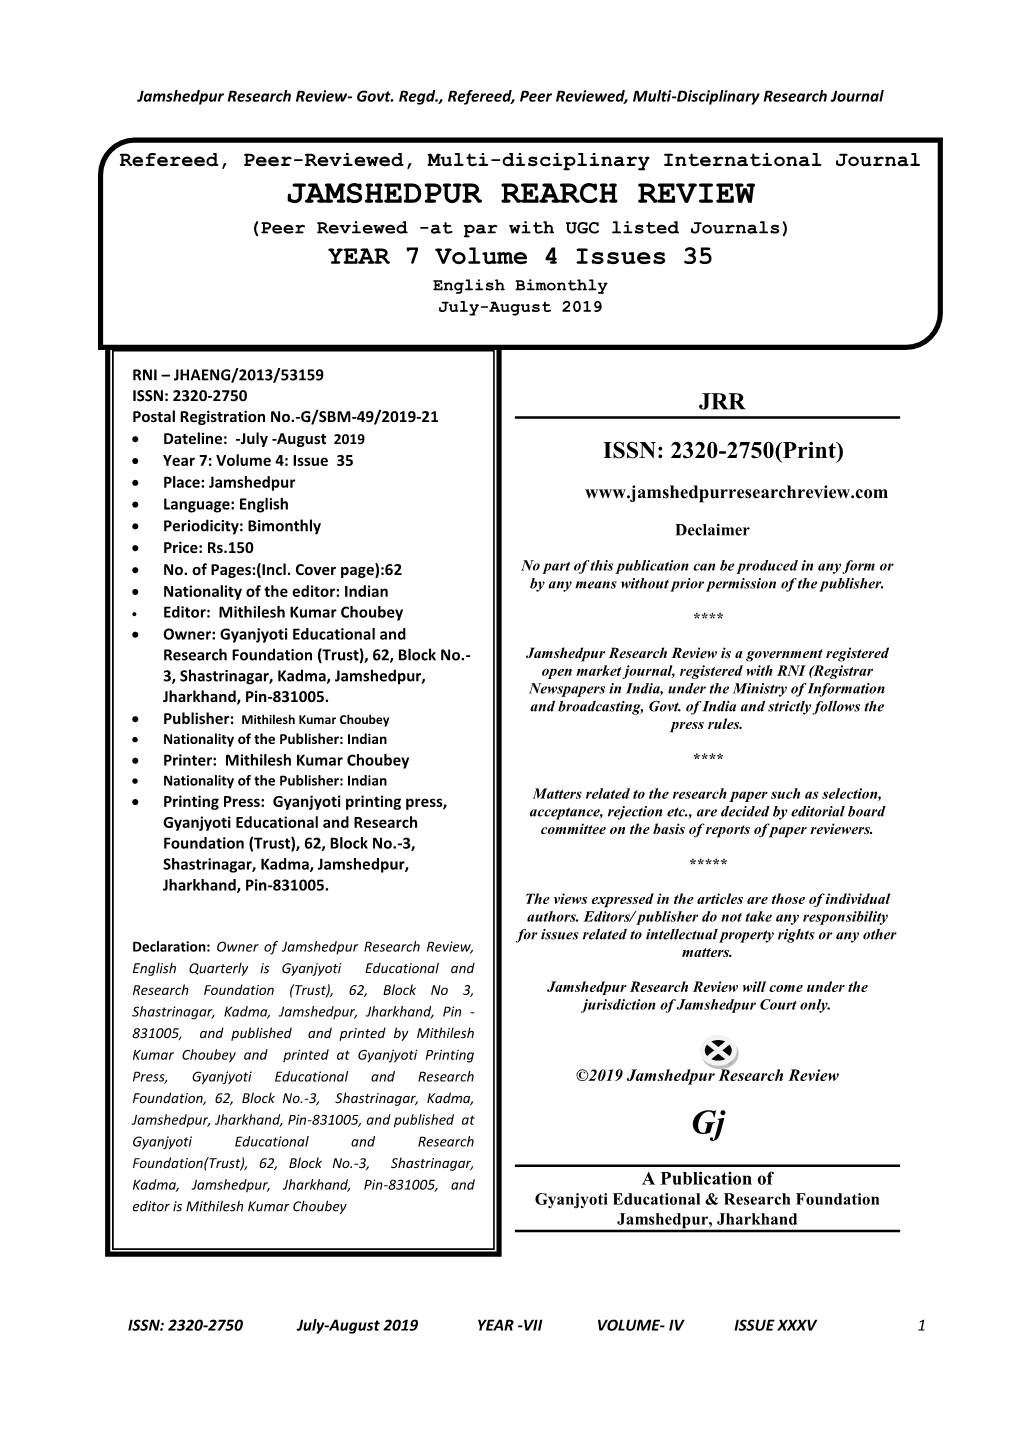 JAMSHEDPUR REARCH REVIEW (Peer Reviewed -At Par with UGC Listed Journals) YEAR 7 Volume 4 Issues 35 English Bimonthly July-August 2019